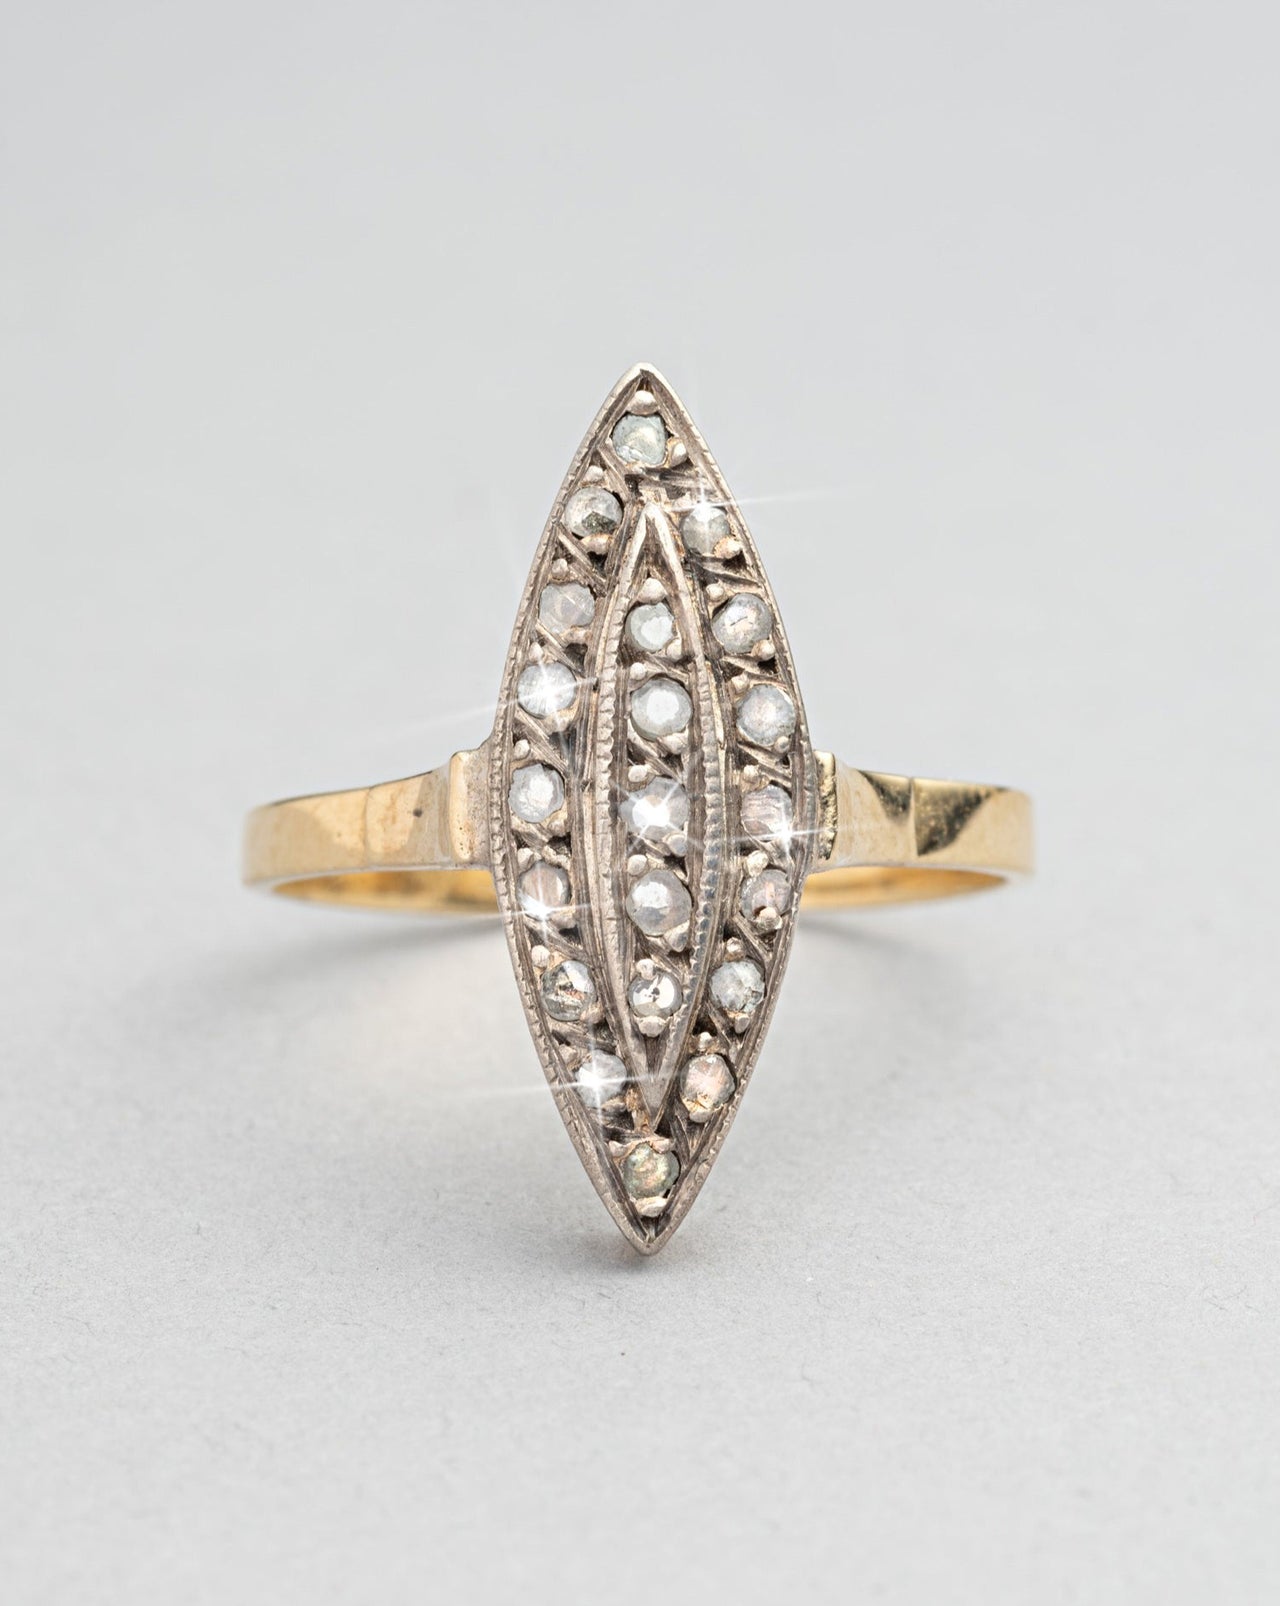 Antique 14k White and Yellow Gold Diamond Navette Ring - Photo 2